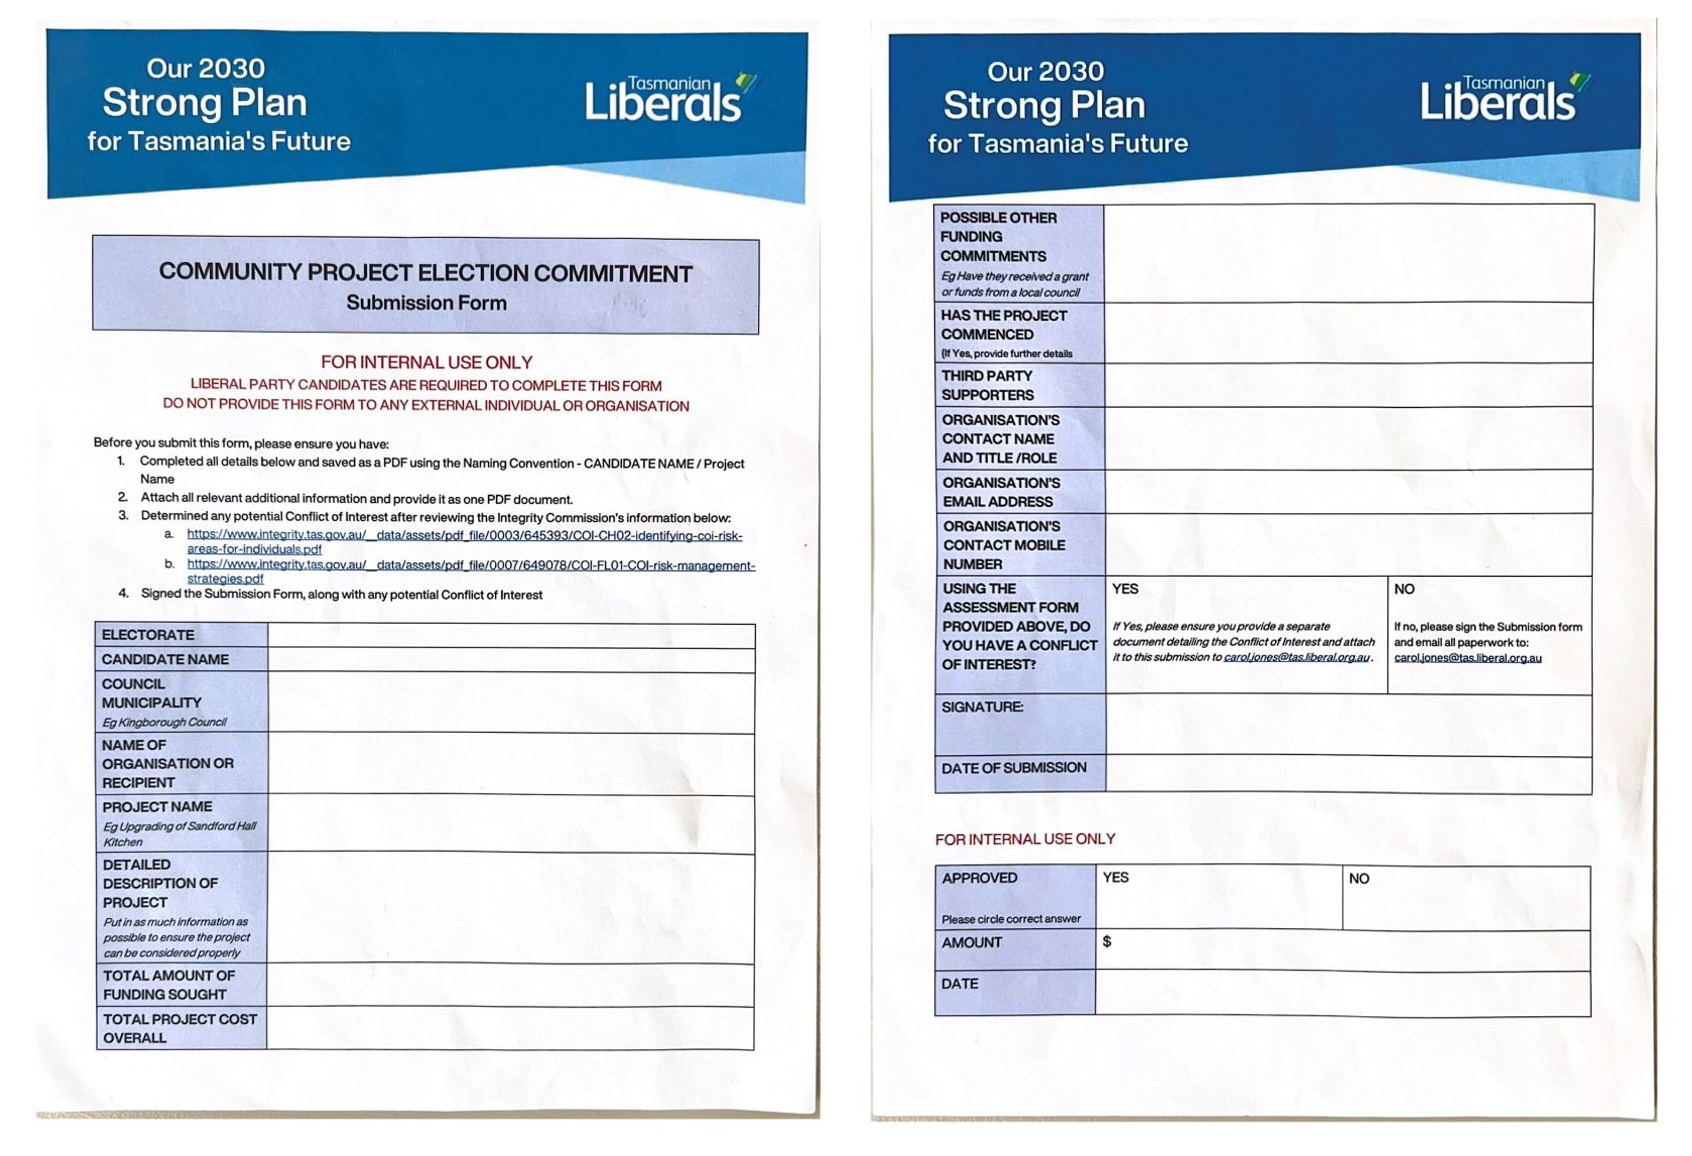 Tasmanian Liberals Community Project Election Commitment submission form.